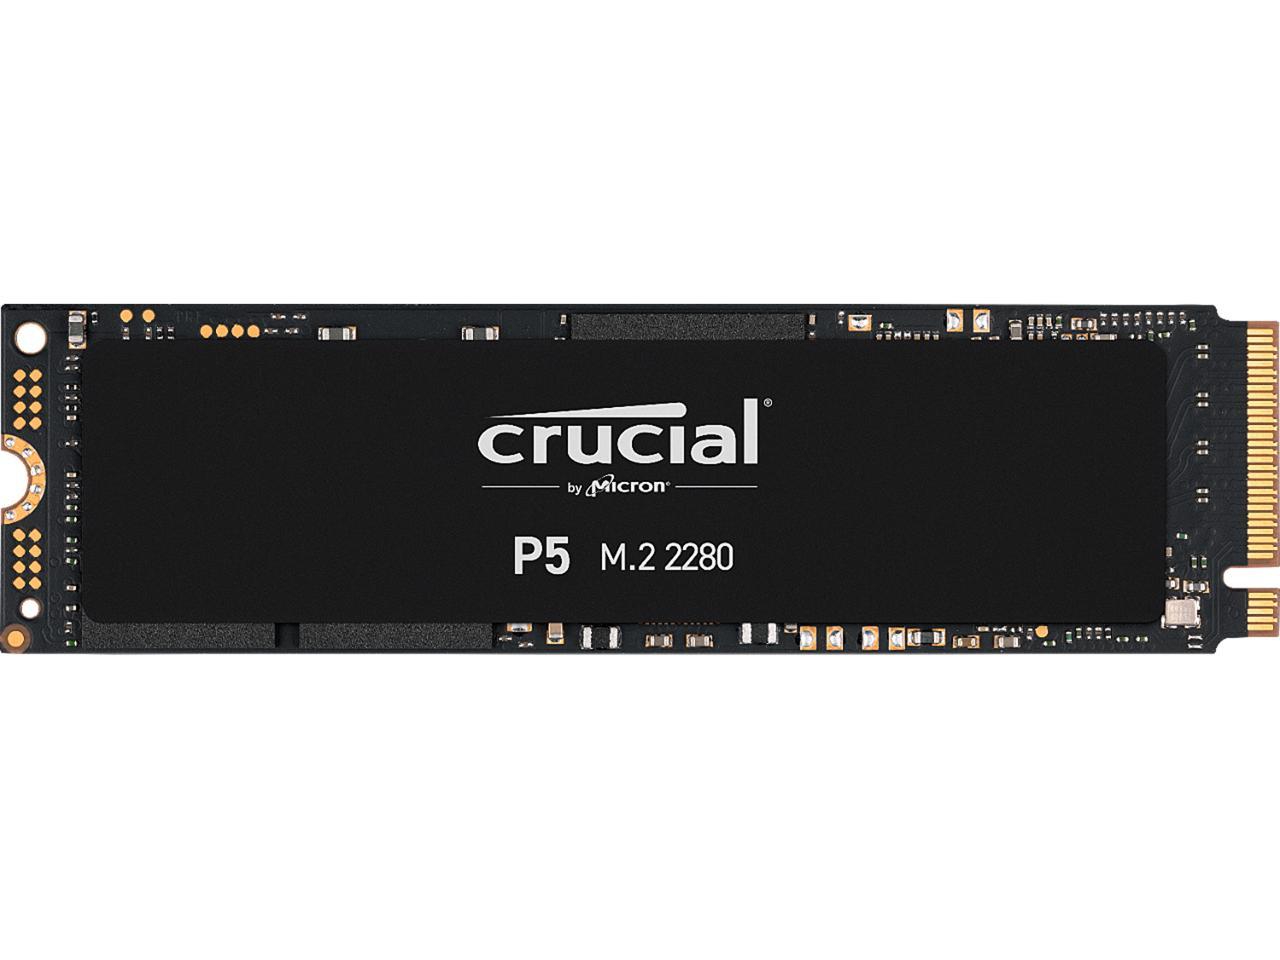 Crucial P5 500GB 3D NAND NVMe Internal SSD, up to 3400 MB/s - CT500P5SSD8 - $44